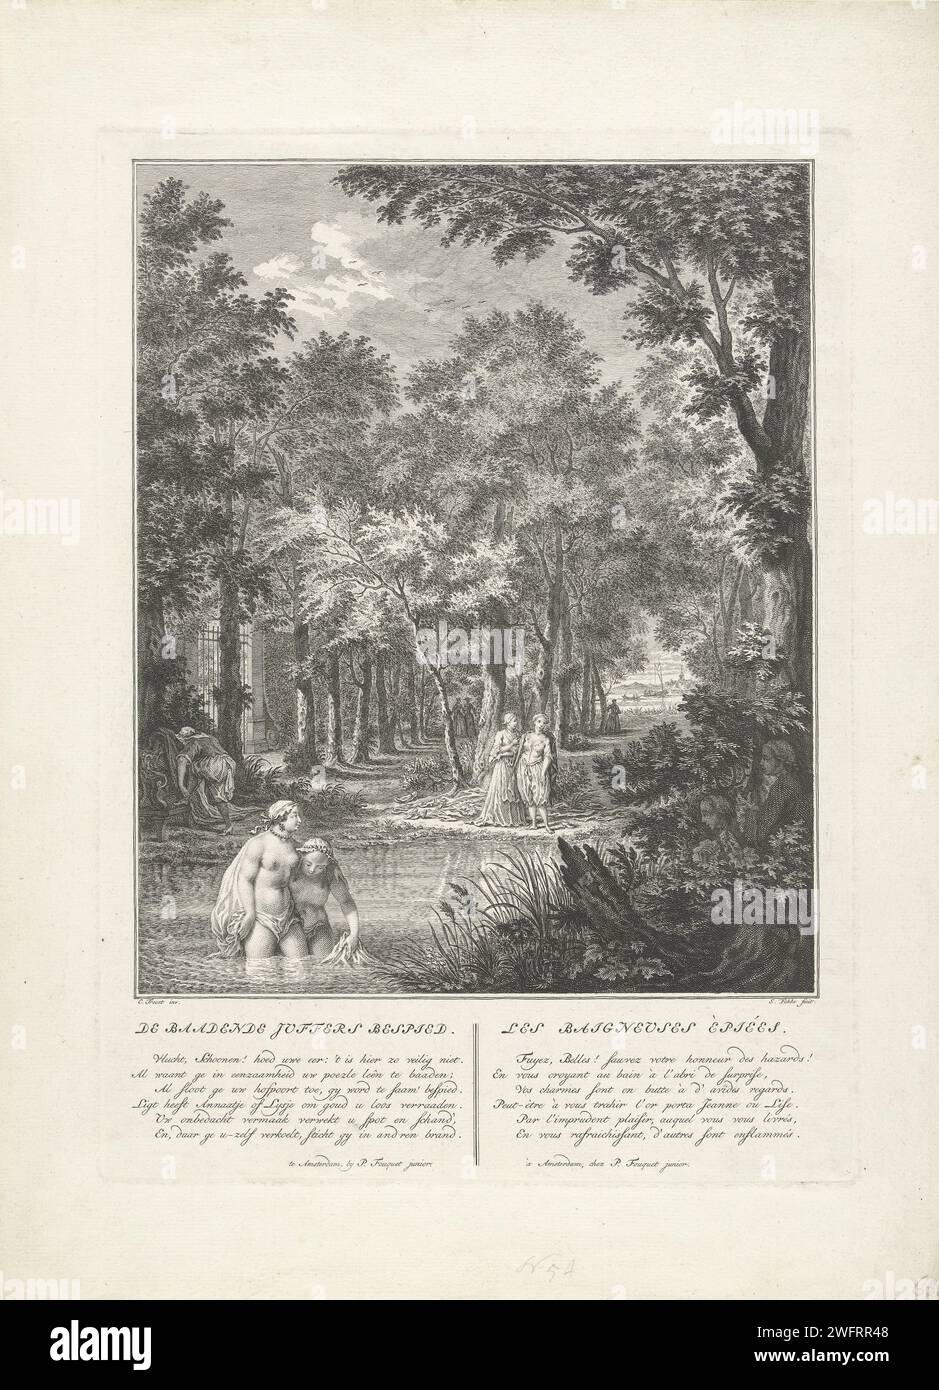 Badent Juffers Bespiid, 1760 - 1796 print Two bathing ladies are spied on by two gentlemen in the bushes. A few figures in the background walk between the trees. Amsterdam paper etching washing and bathing. peeping, voyeur Stock Photo